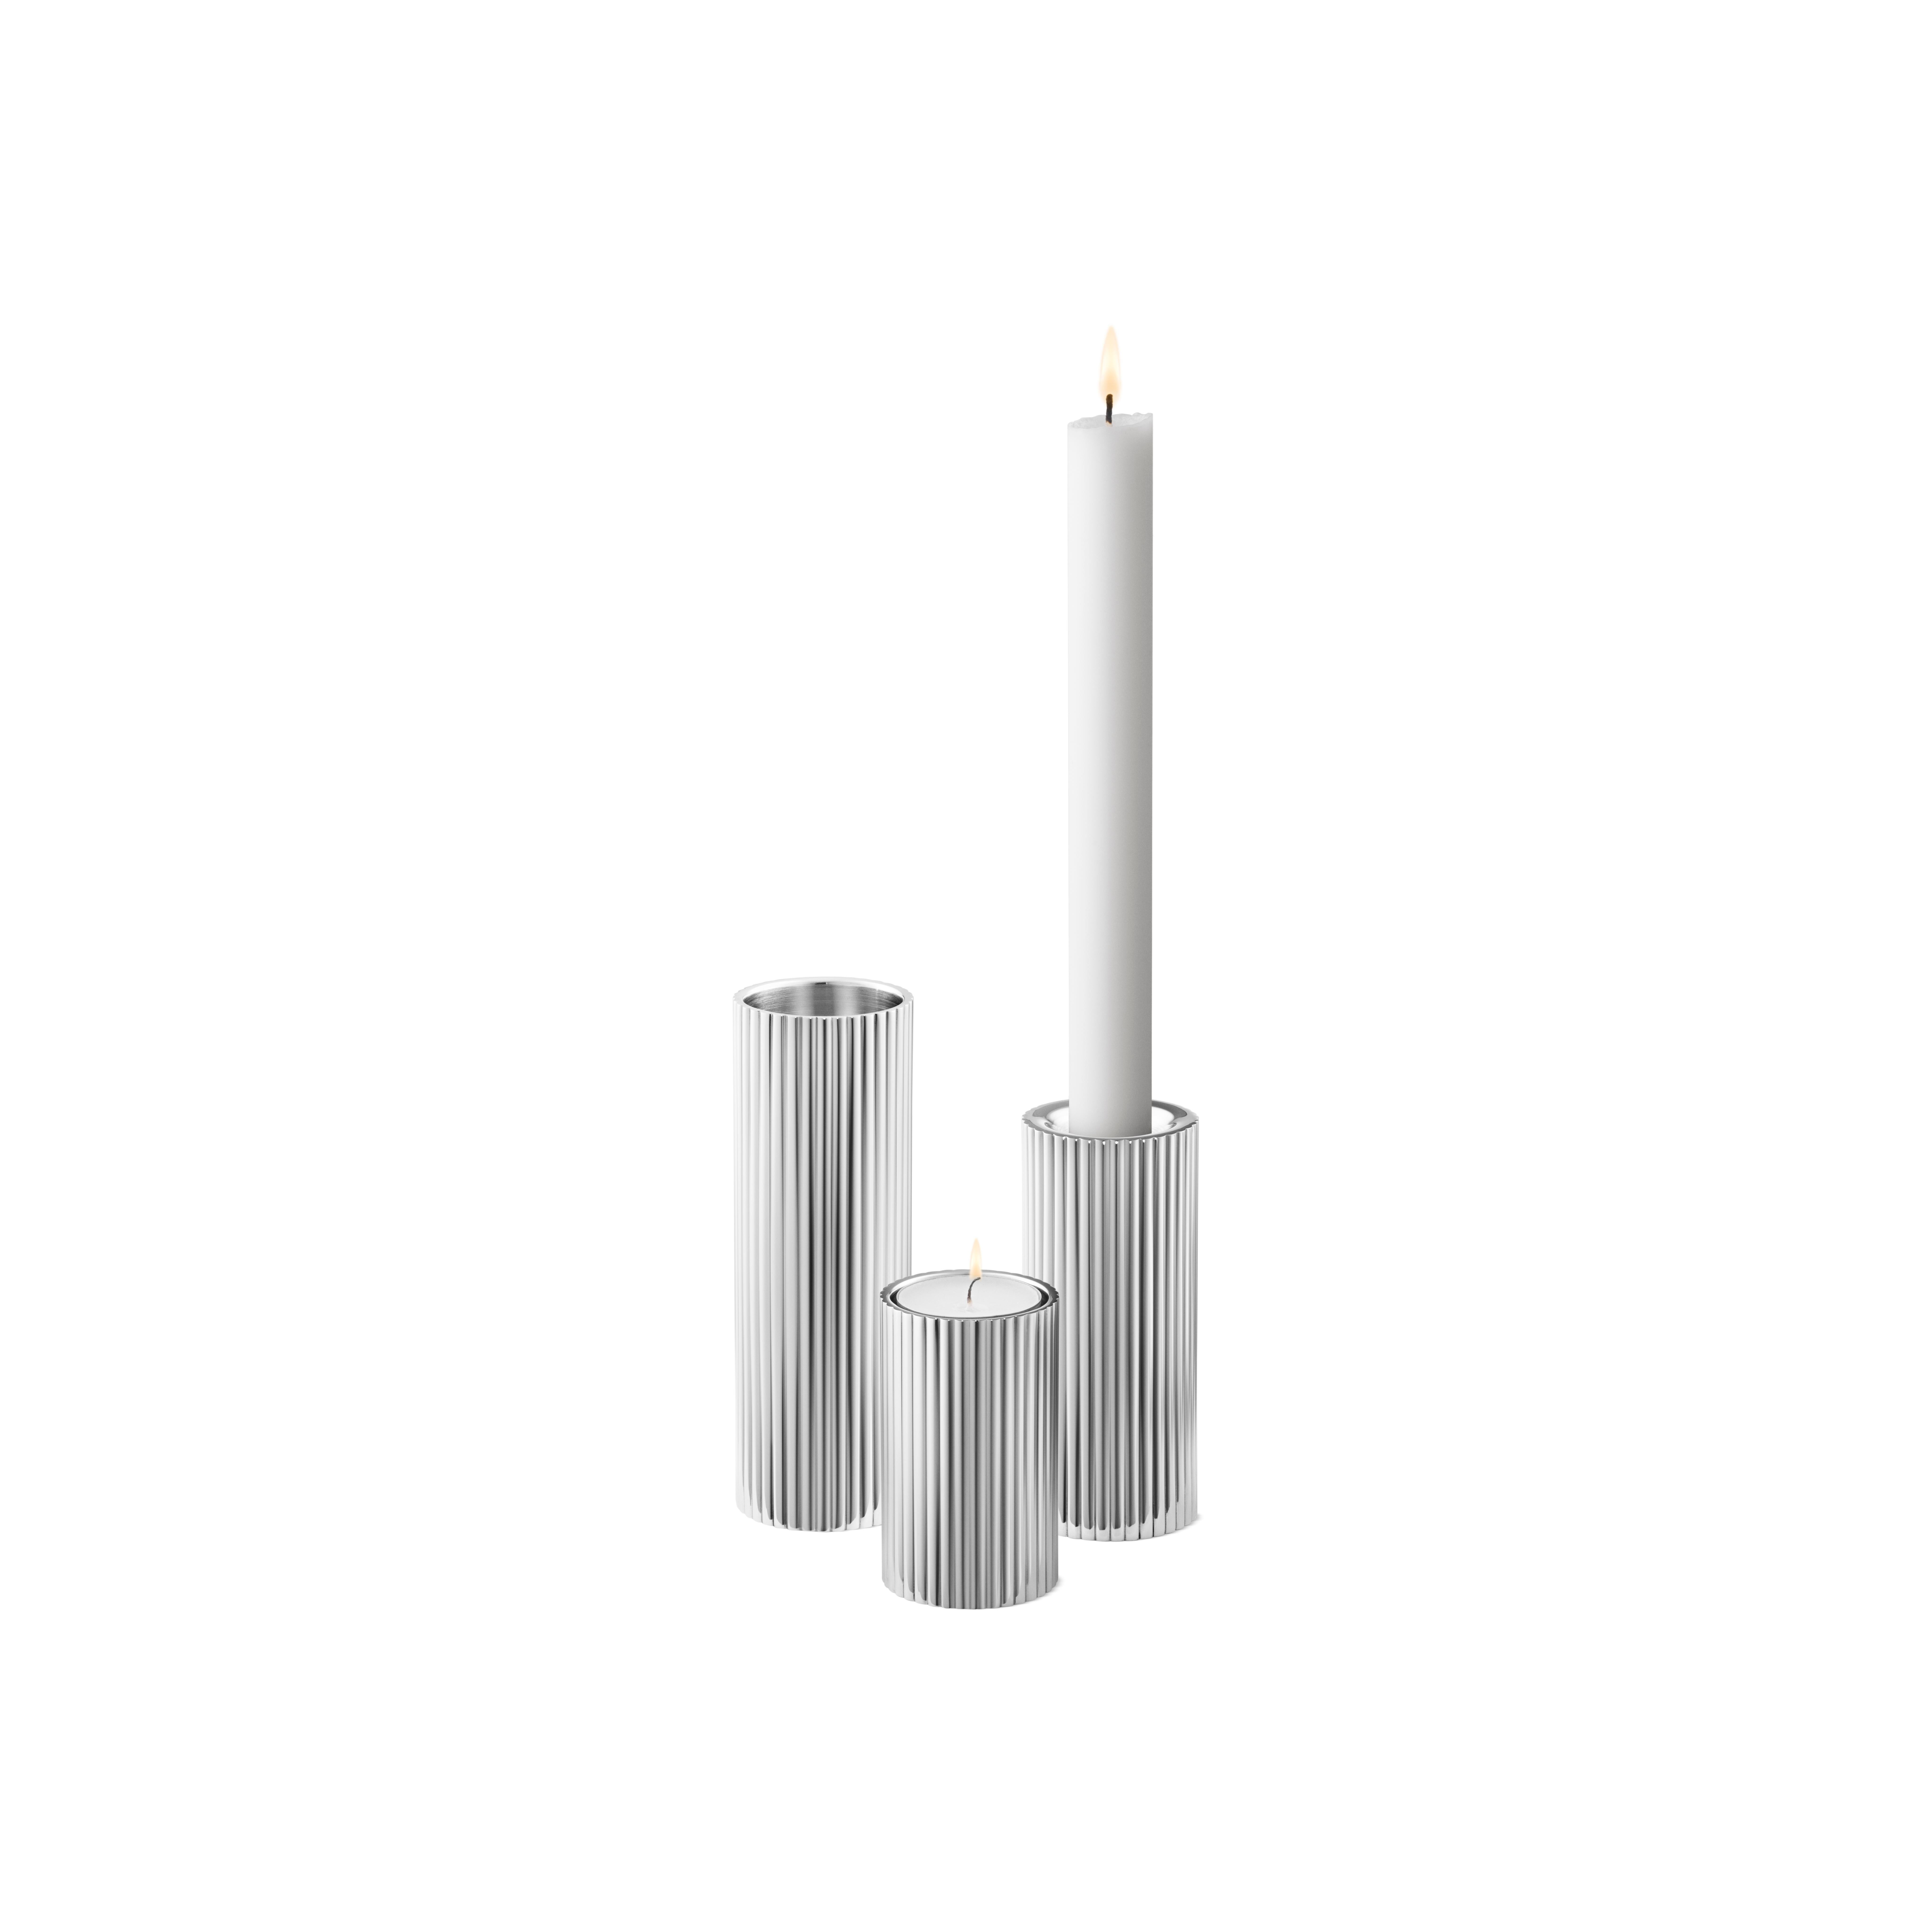 A beautiful example of Scandinavian modernism, this small candleholder brings together both form and function. The Art Deco-inspired grooves give it a strong graphic presence as it holds a taper candle or a tea-light when turned upside down. This